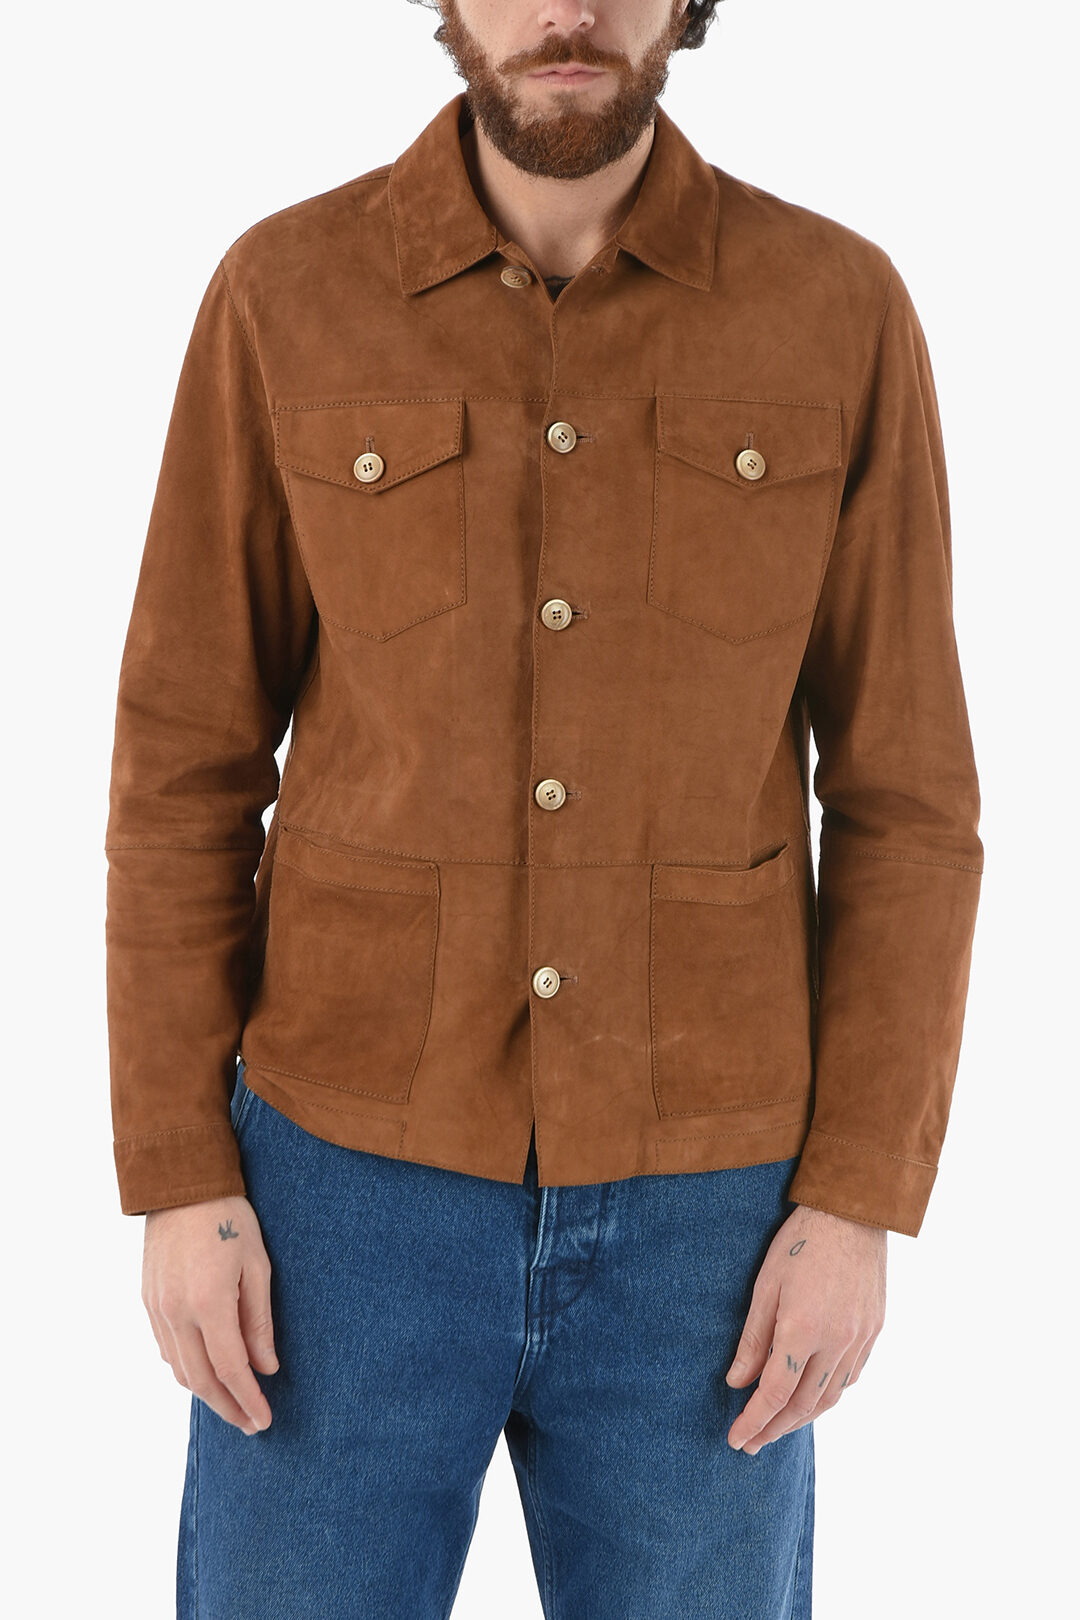 Altea Suede DERBY utility Overshirt with Visible Stiching men - Glamood ...